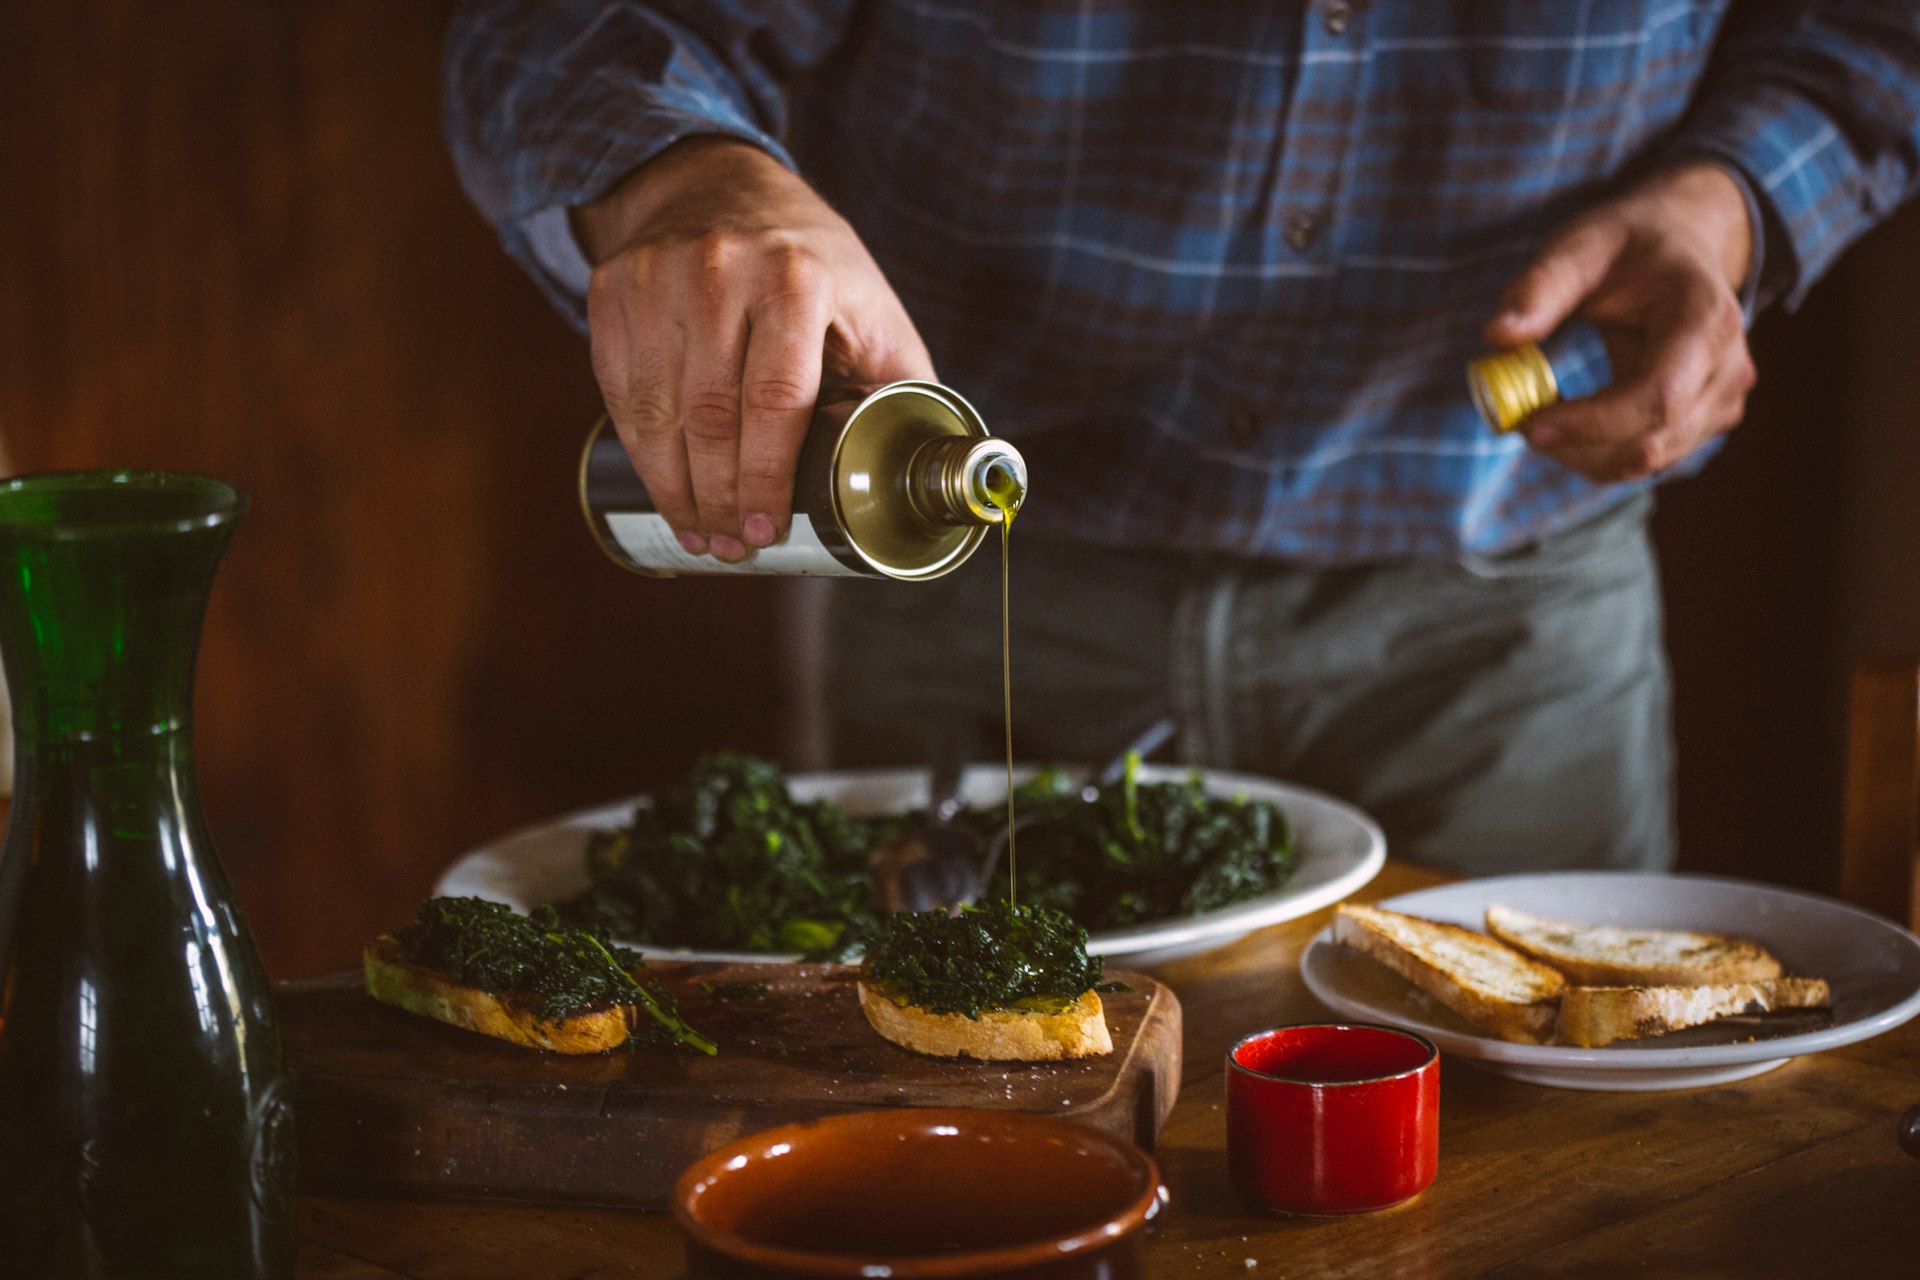 A close-frame image of a person pouring olive oil into a dish, wearing an apron. The image is cropped so we can just see their hands and torso standing behind a table laden with Italian oil, wines, and bruschetta. 